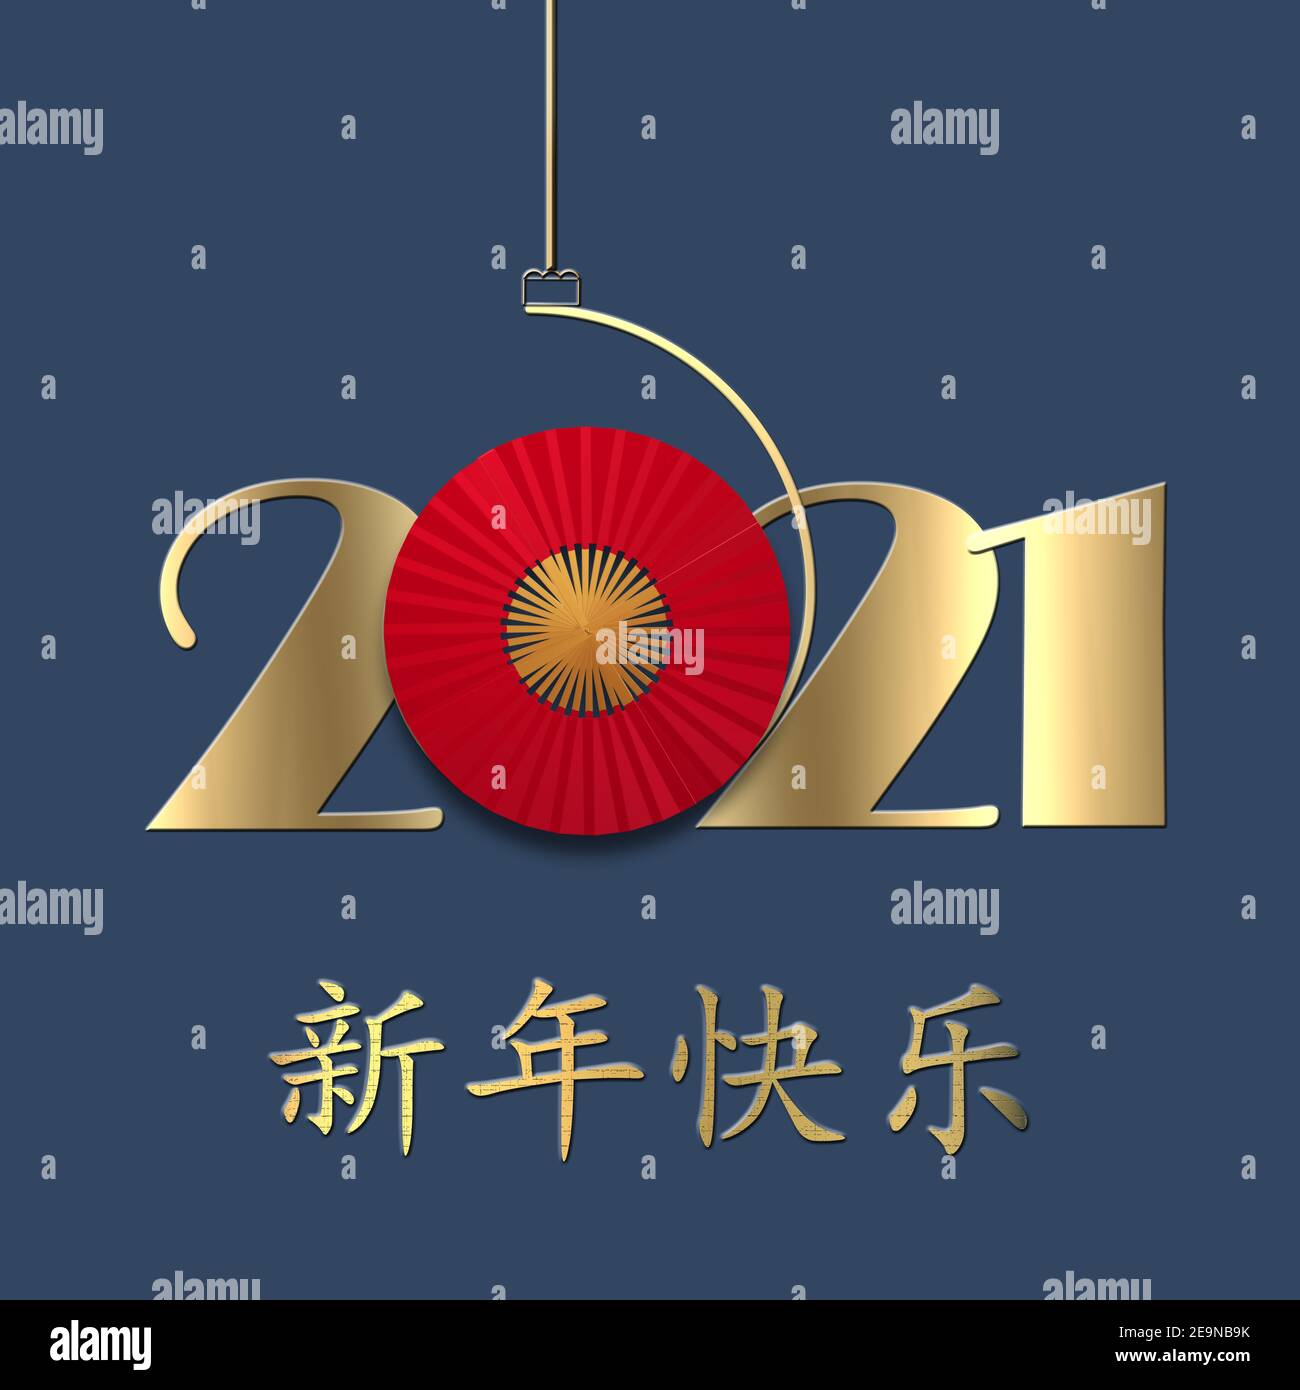 Nouvel an chinois 2021 sur fond bleu. Gold text Happy Chinese New Year, DIGIT 2021, fan Design for greetings, oriental New Year card. Illustrat 3D Banque D'Images